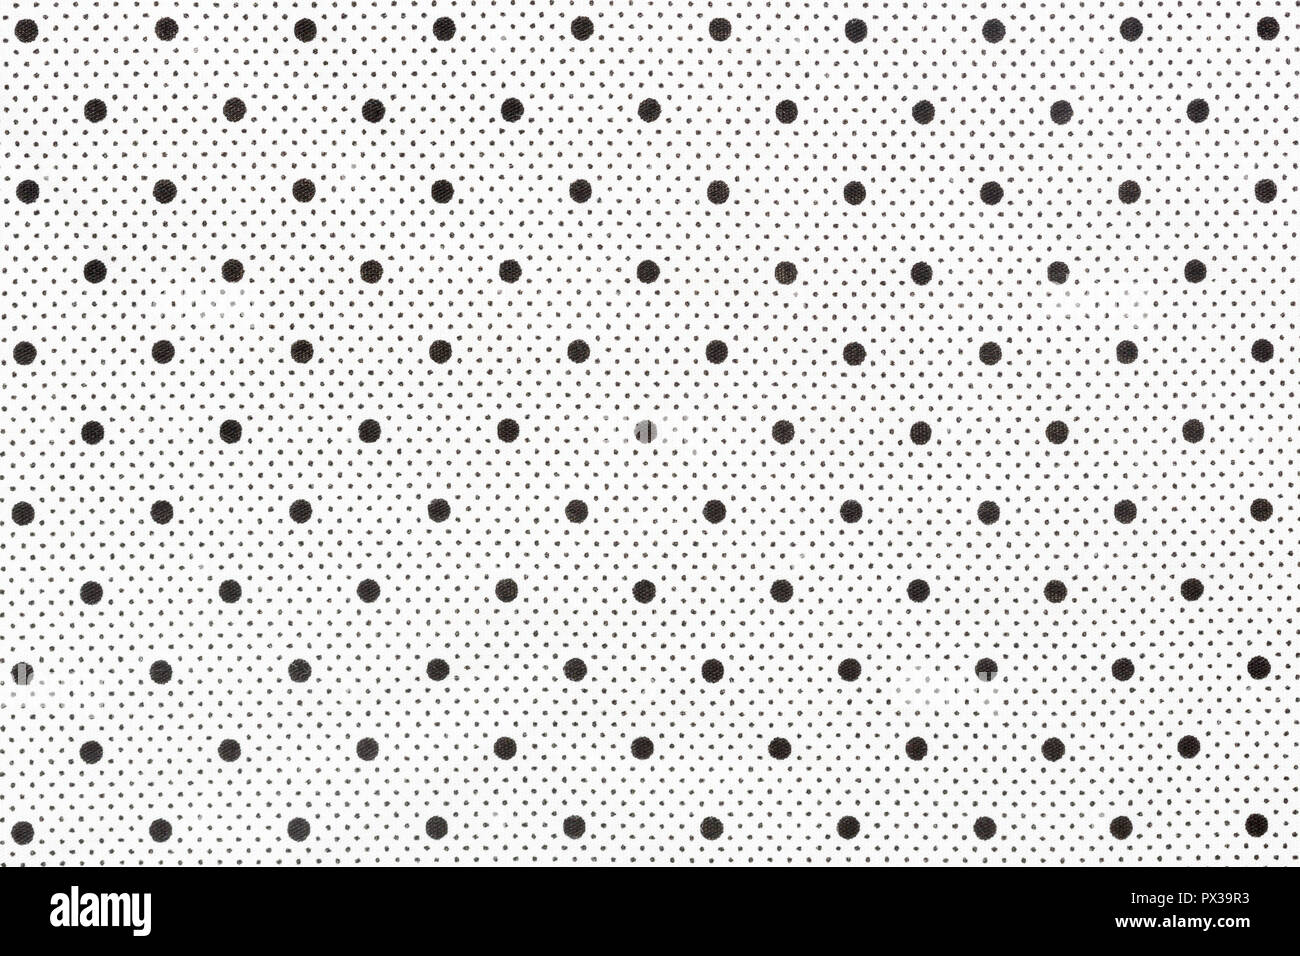 White fabric with black dots as background. Stock Photo